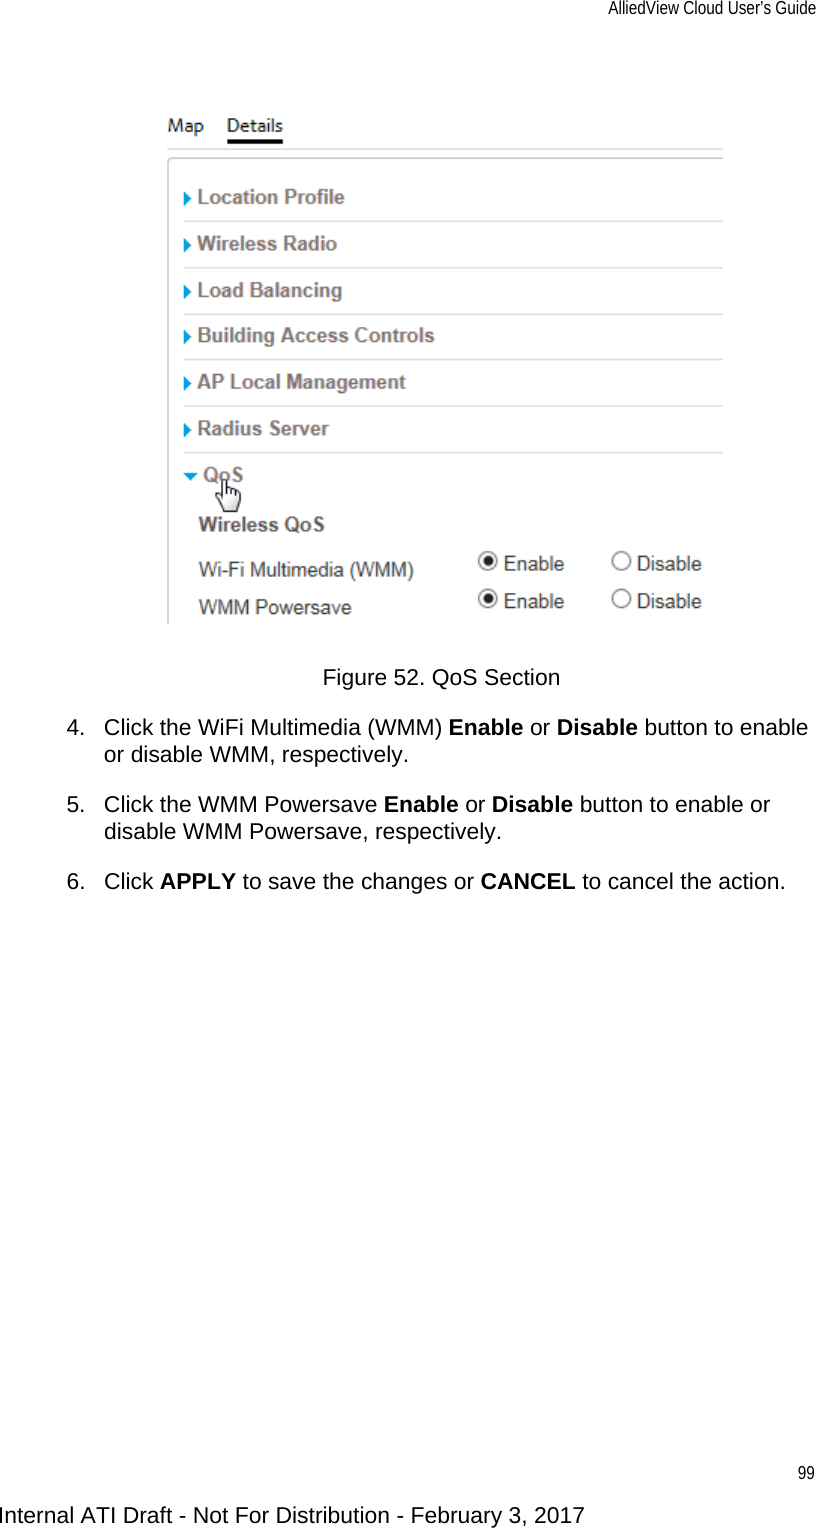 AlliedView Cloud User’s Guide99Figure 52. QoS Section4. Click the WiFi Multimedia (WMM) Enable or Disable button to enable or disable WMM, respectively.5. Click the WMM Powersave Enable or Disable button to enable or disable WMM Powersave, respectively.6. Click APPLY to save the changes or CANCEL to cancel the action.Internal ATI Draft - Not For Distribution - February 3, 2017